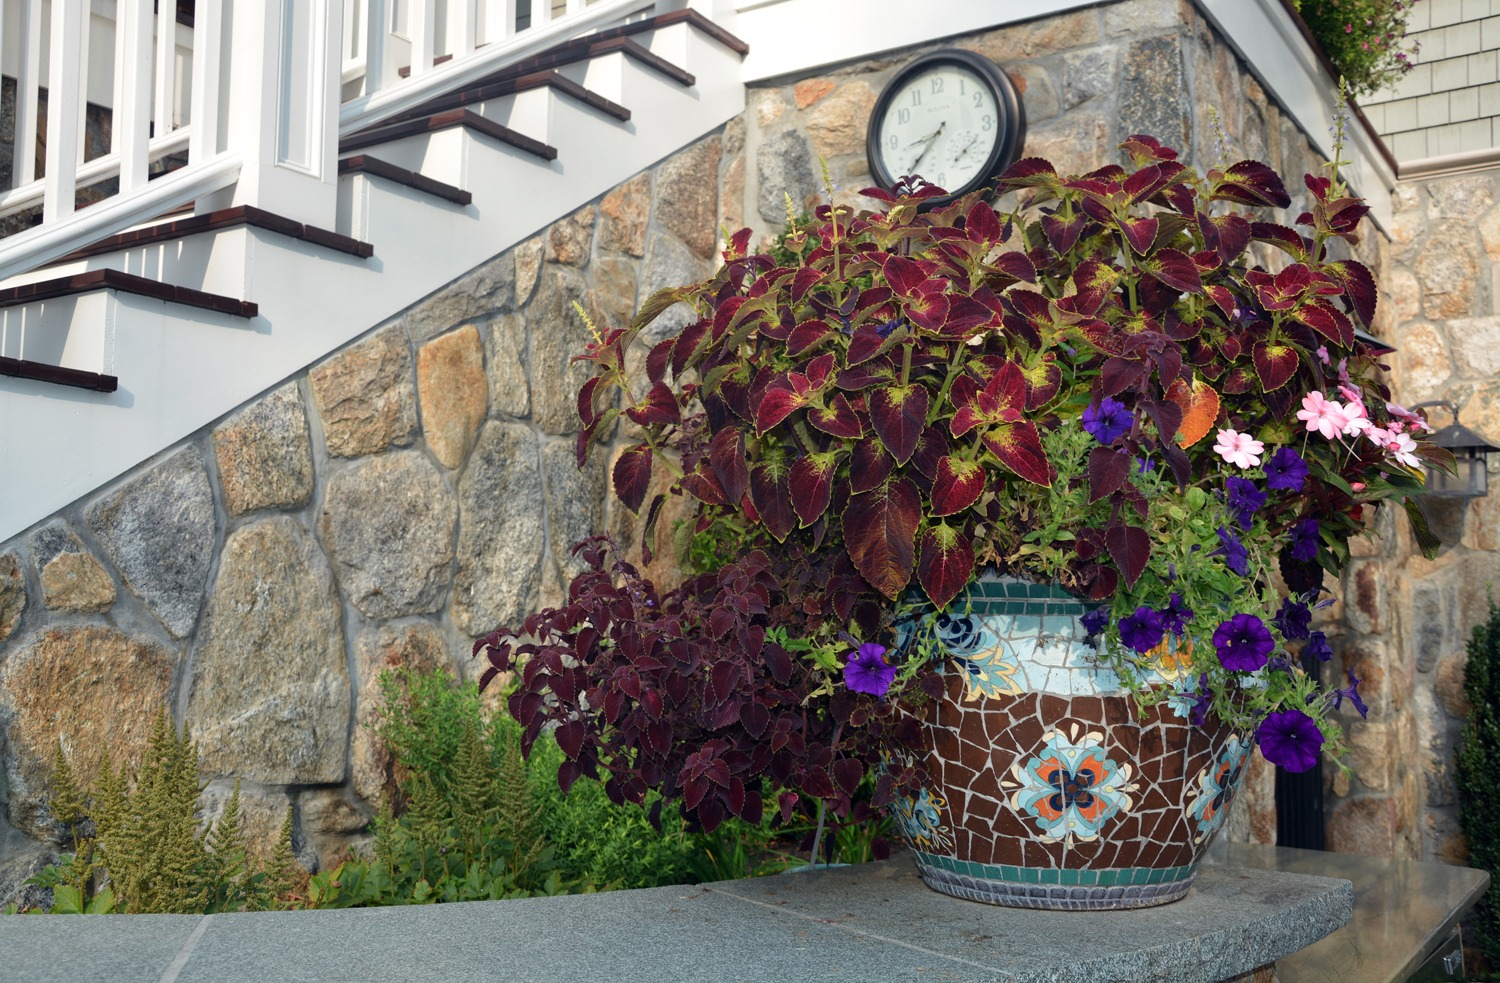 A vibrant flowerpot with red and purple foliage sits by stone stairs; an outdoor clock hangs above. The setting suggests a well-maintained home entrance.